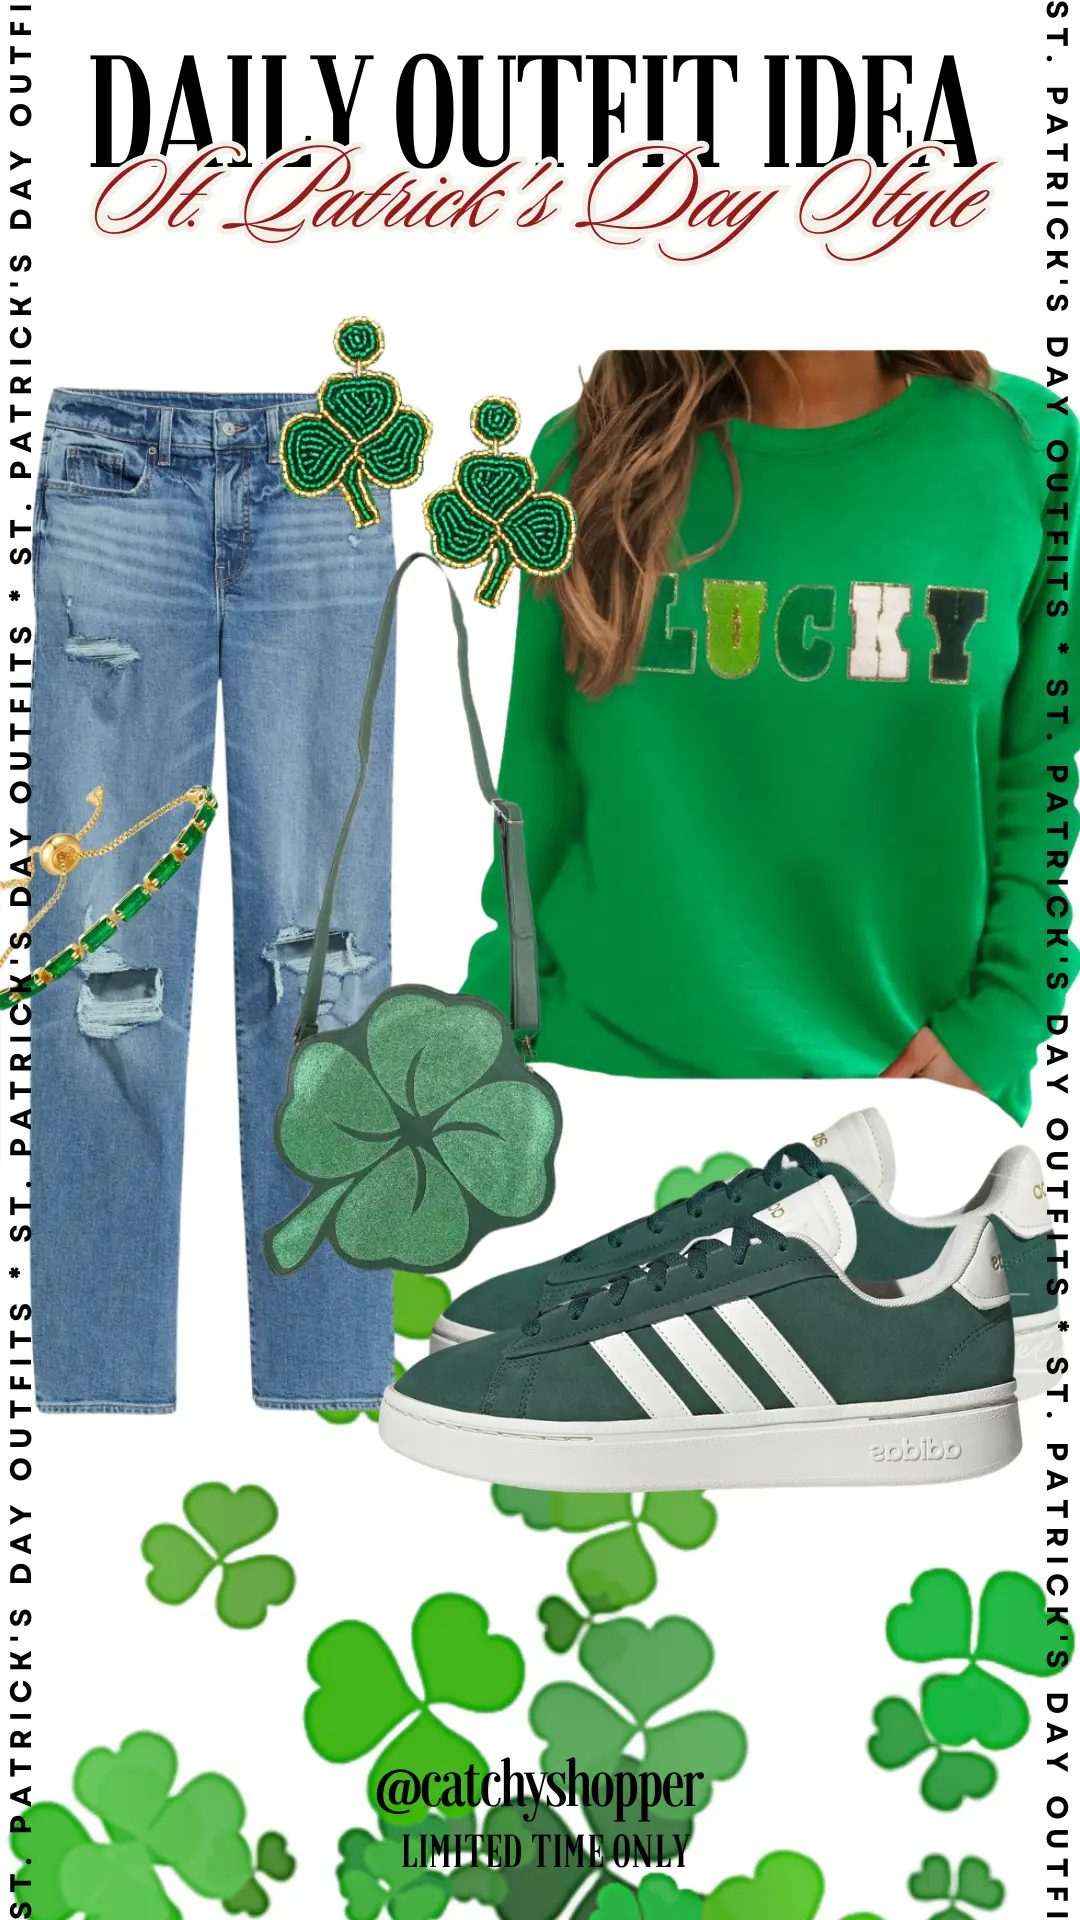 St Patrick's Day Outfit Ideas 